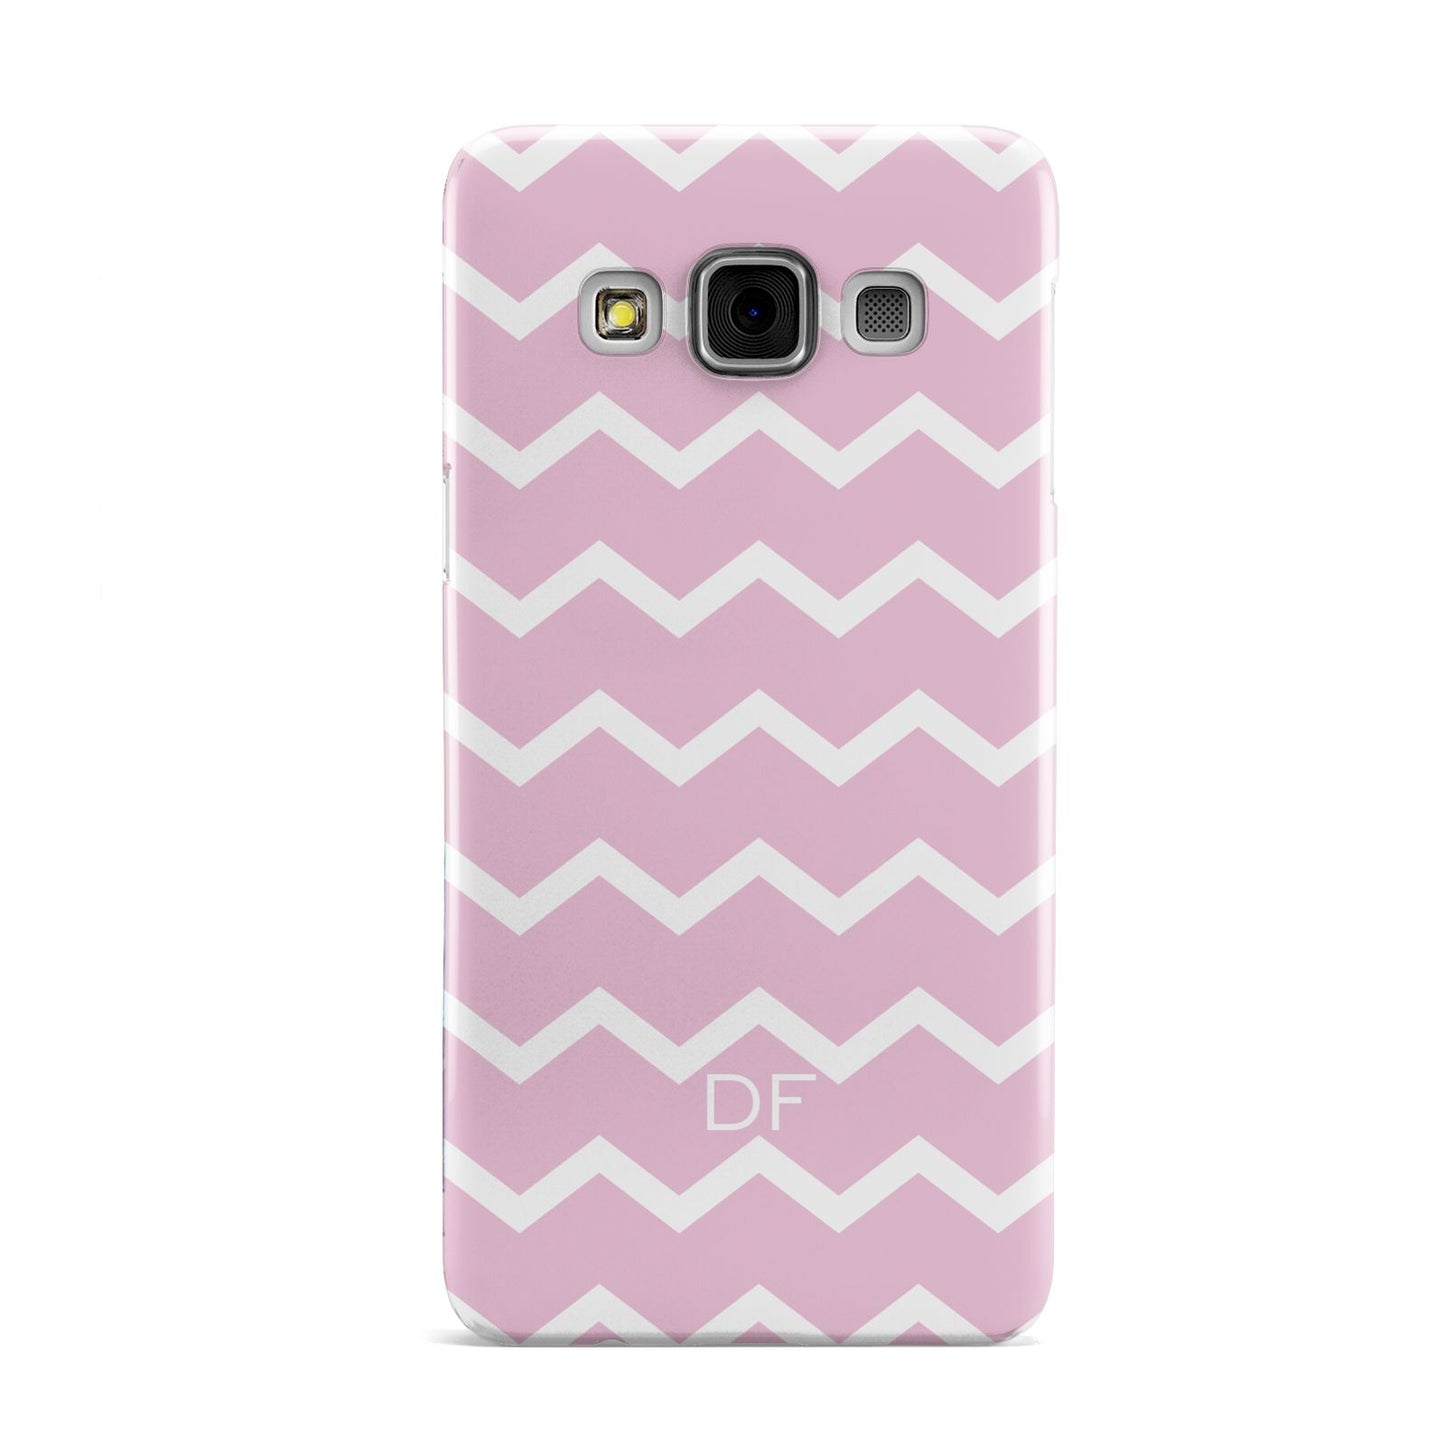 Personalised Chevron Pink Samsung Galaxy A3 Case